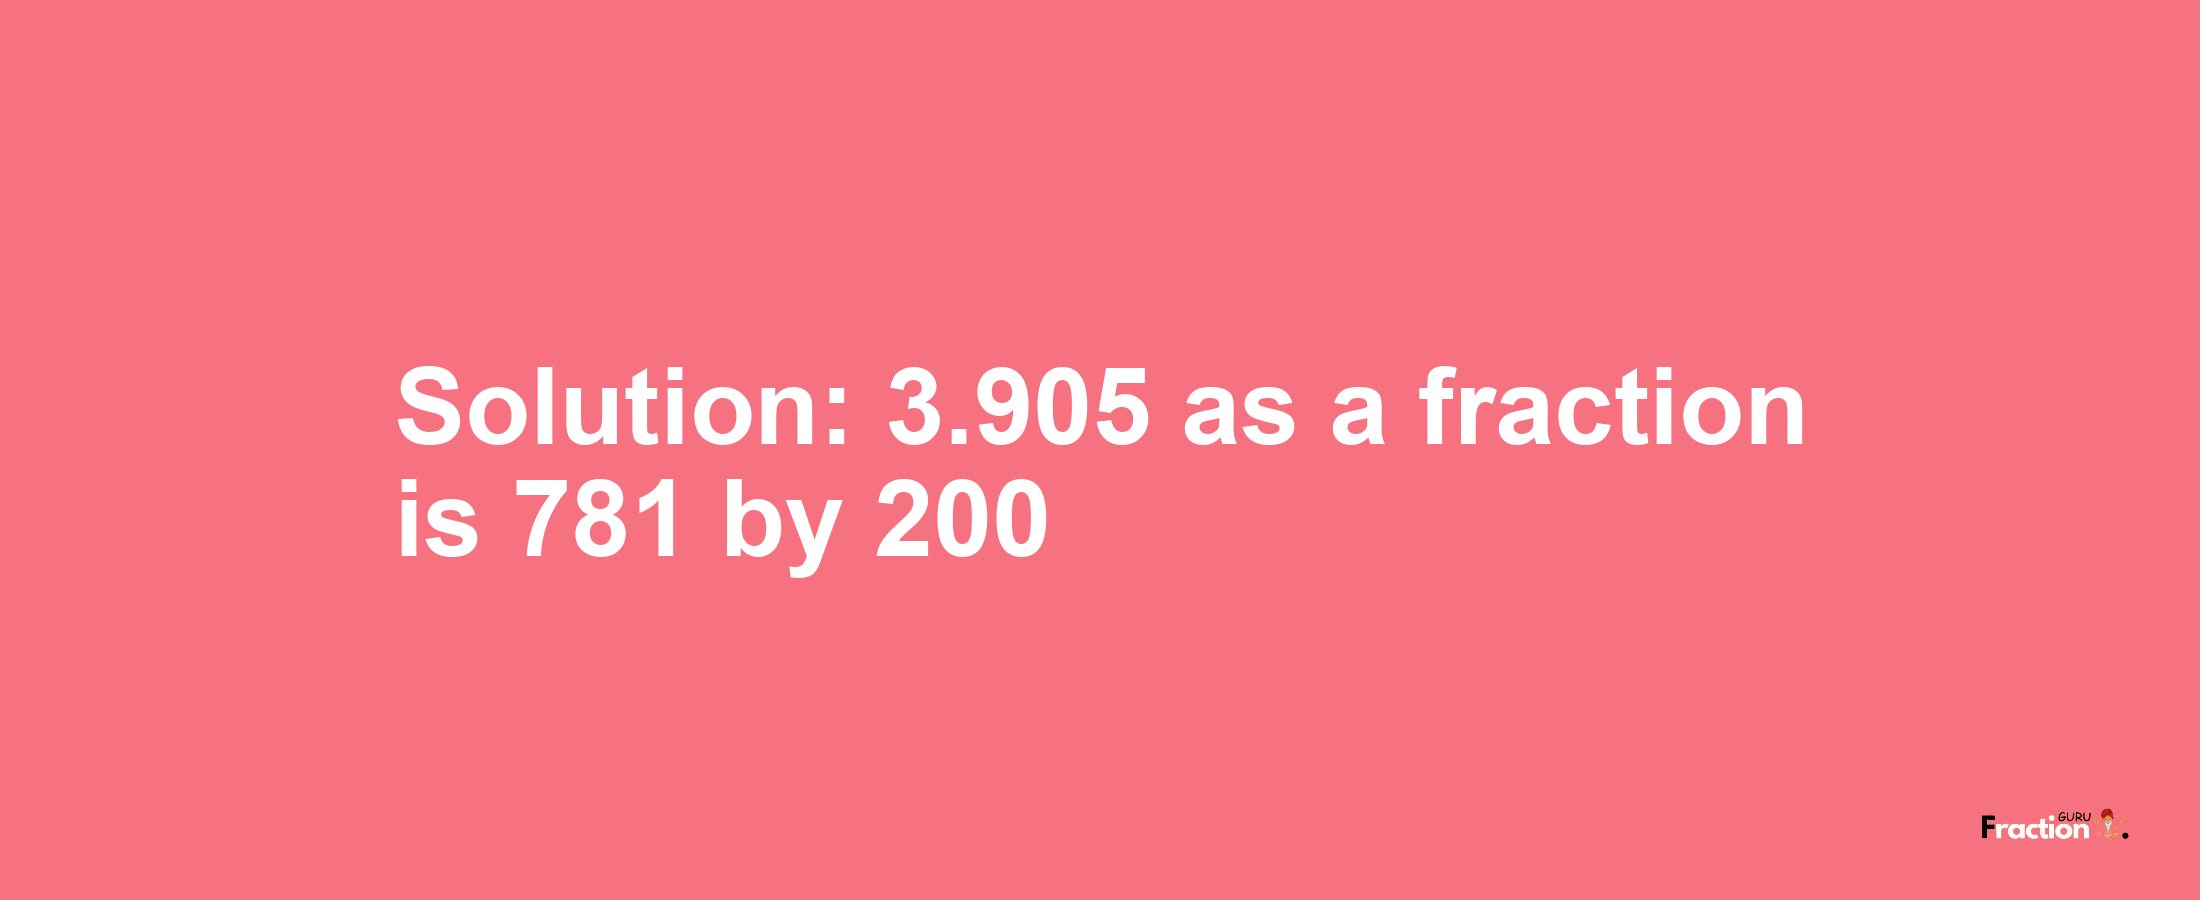 Solution:3.905 as a fraction is 781/200